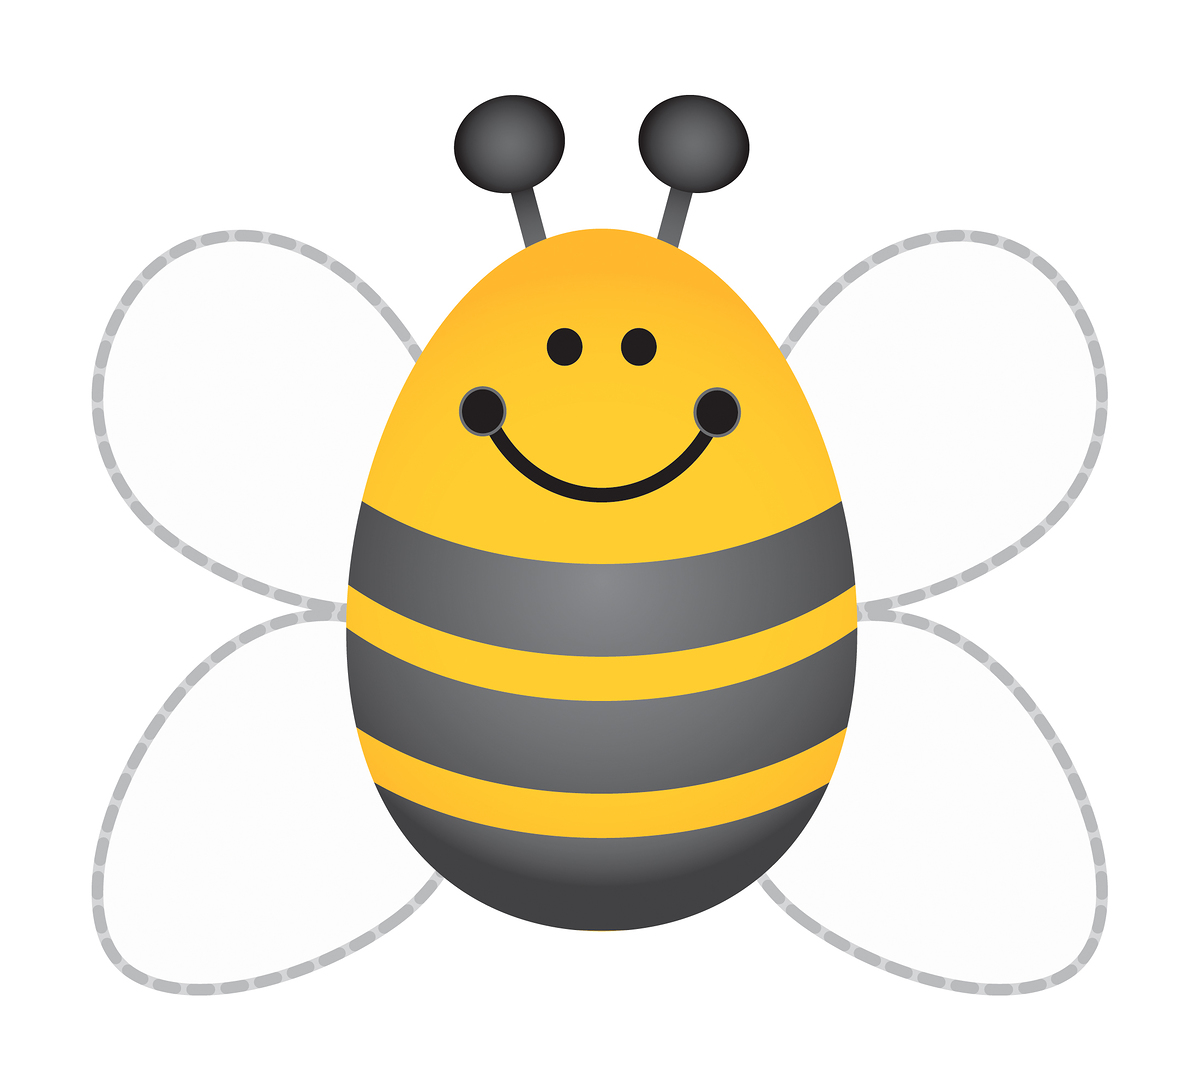 printable-bumble-bee-template-clipart-best